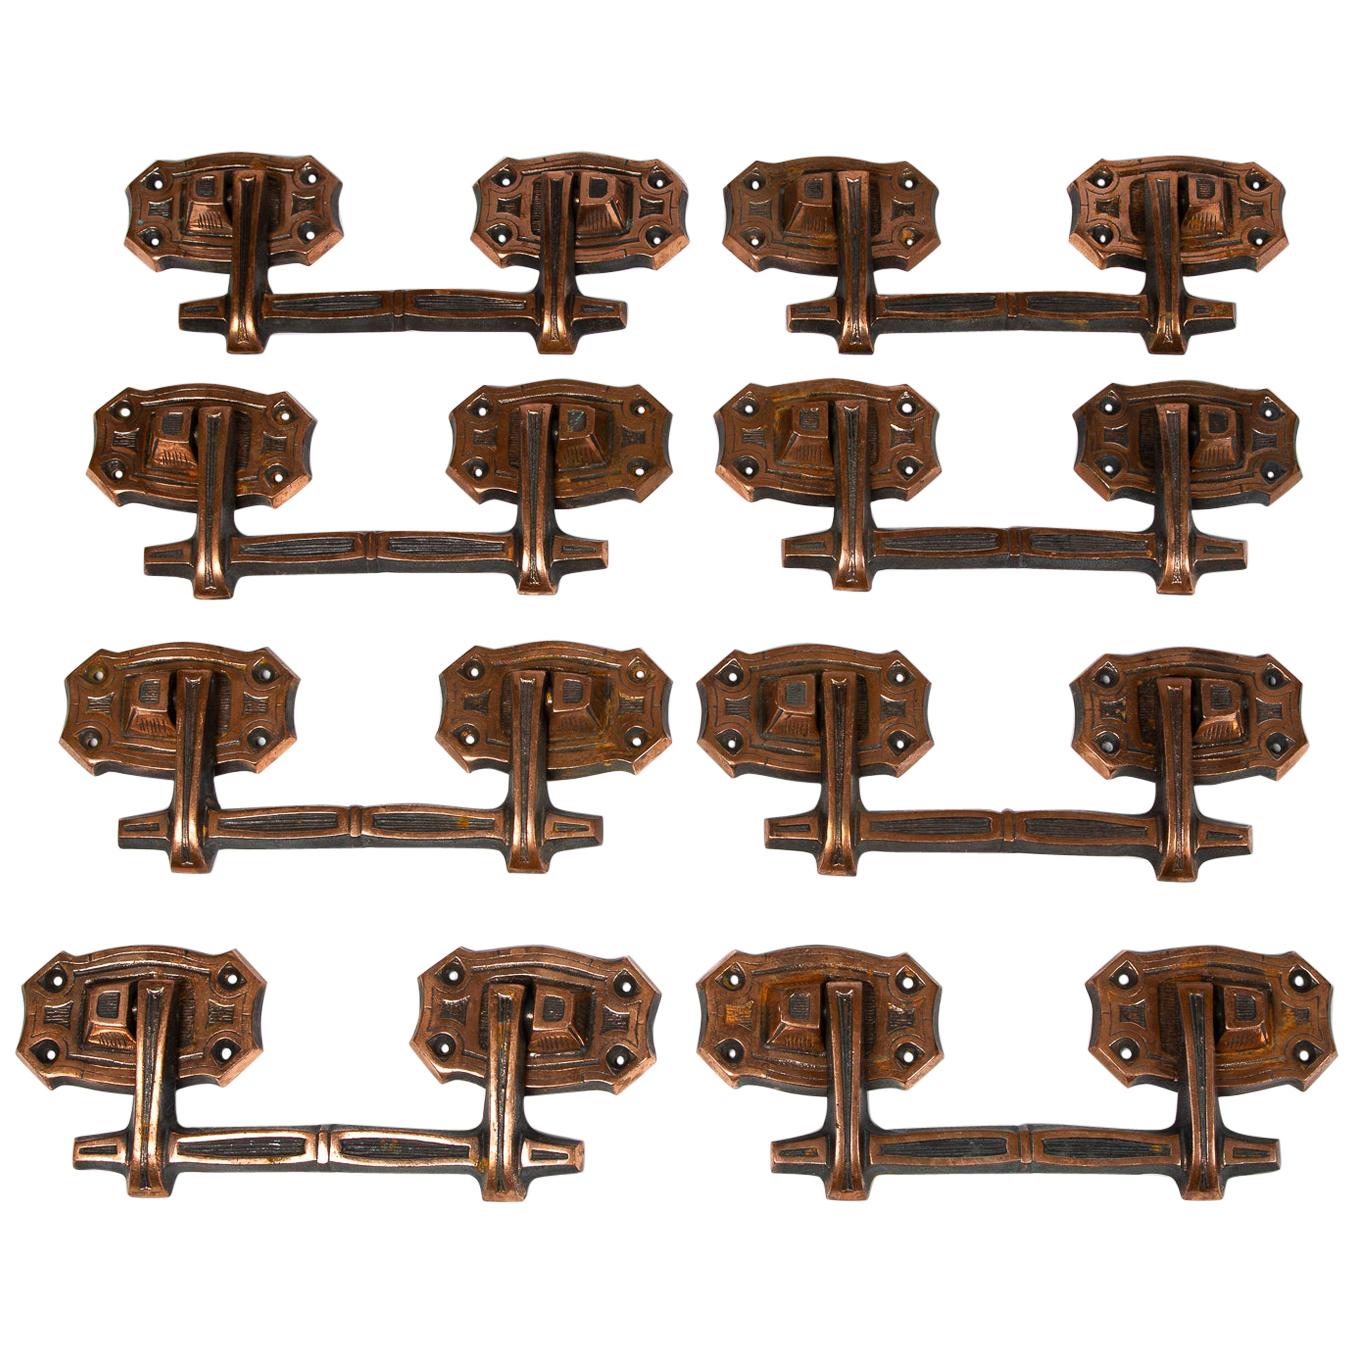 Set of 8 Copper-Plated Iron Handles, French, circa 1900 For Sale